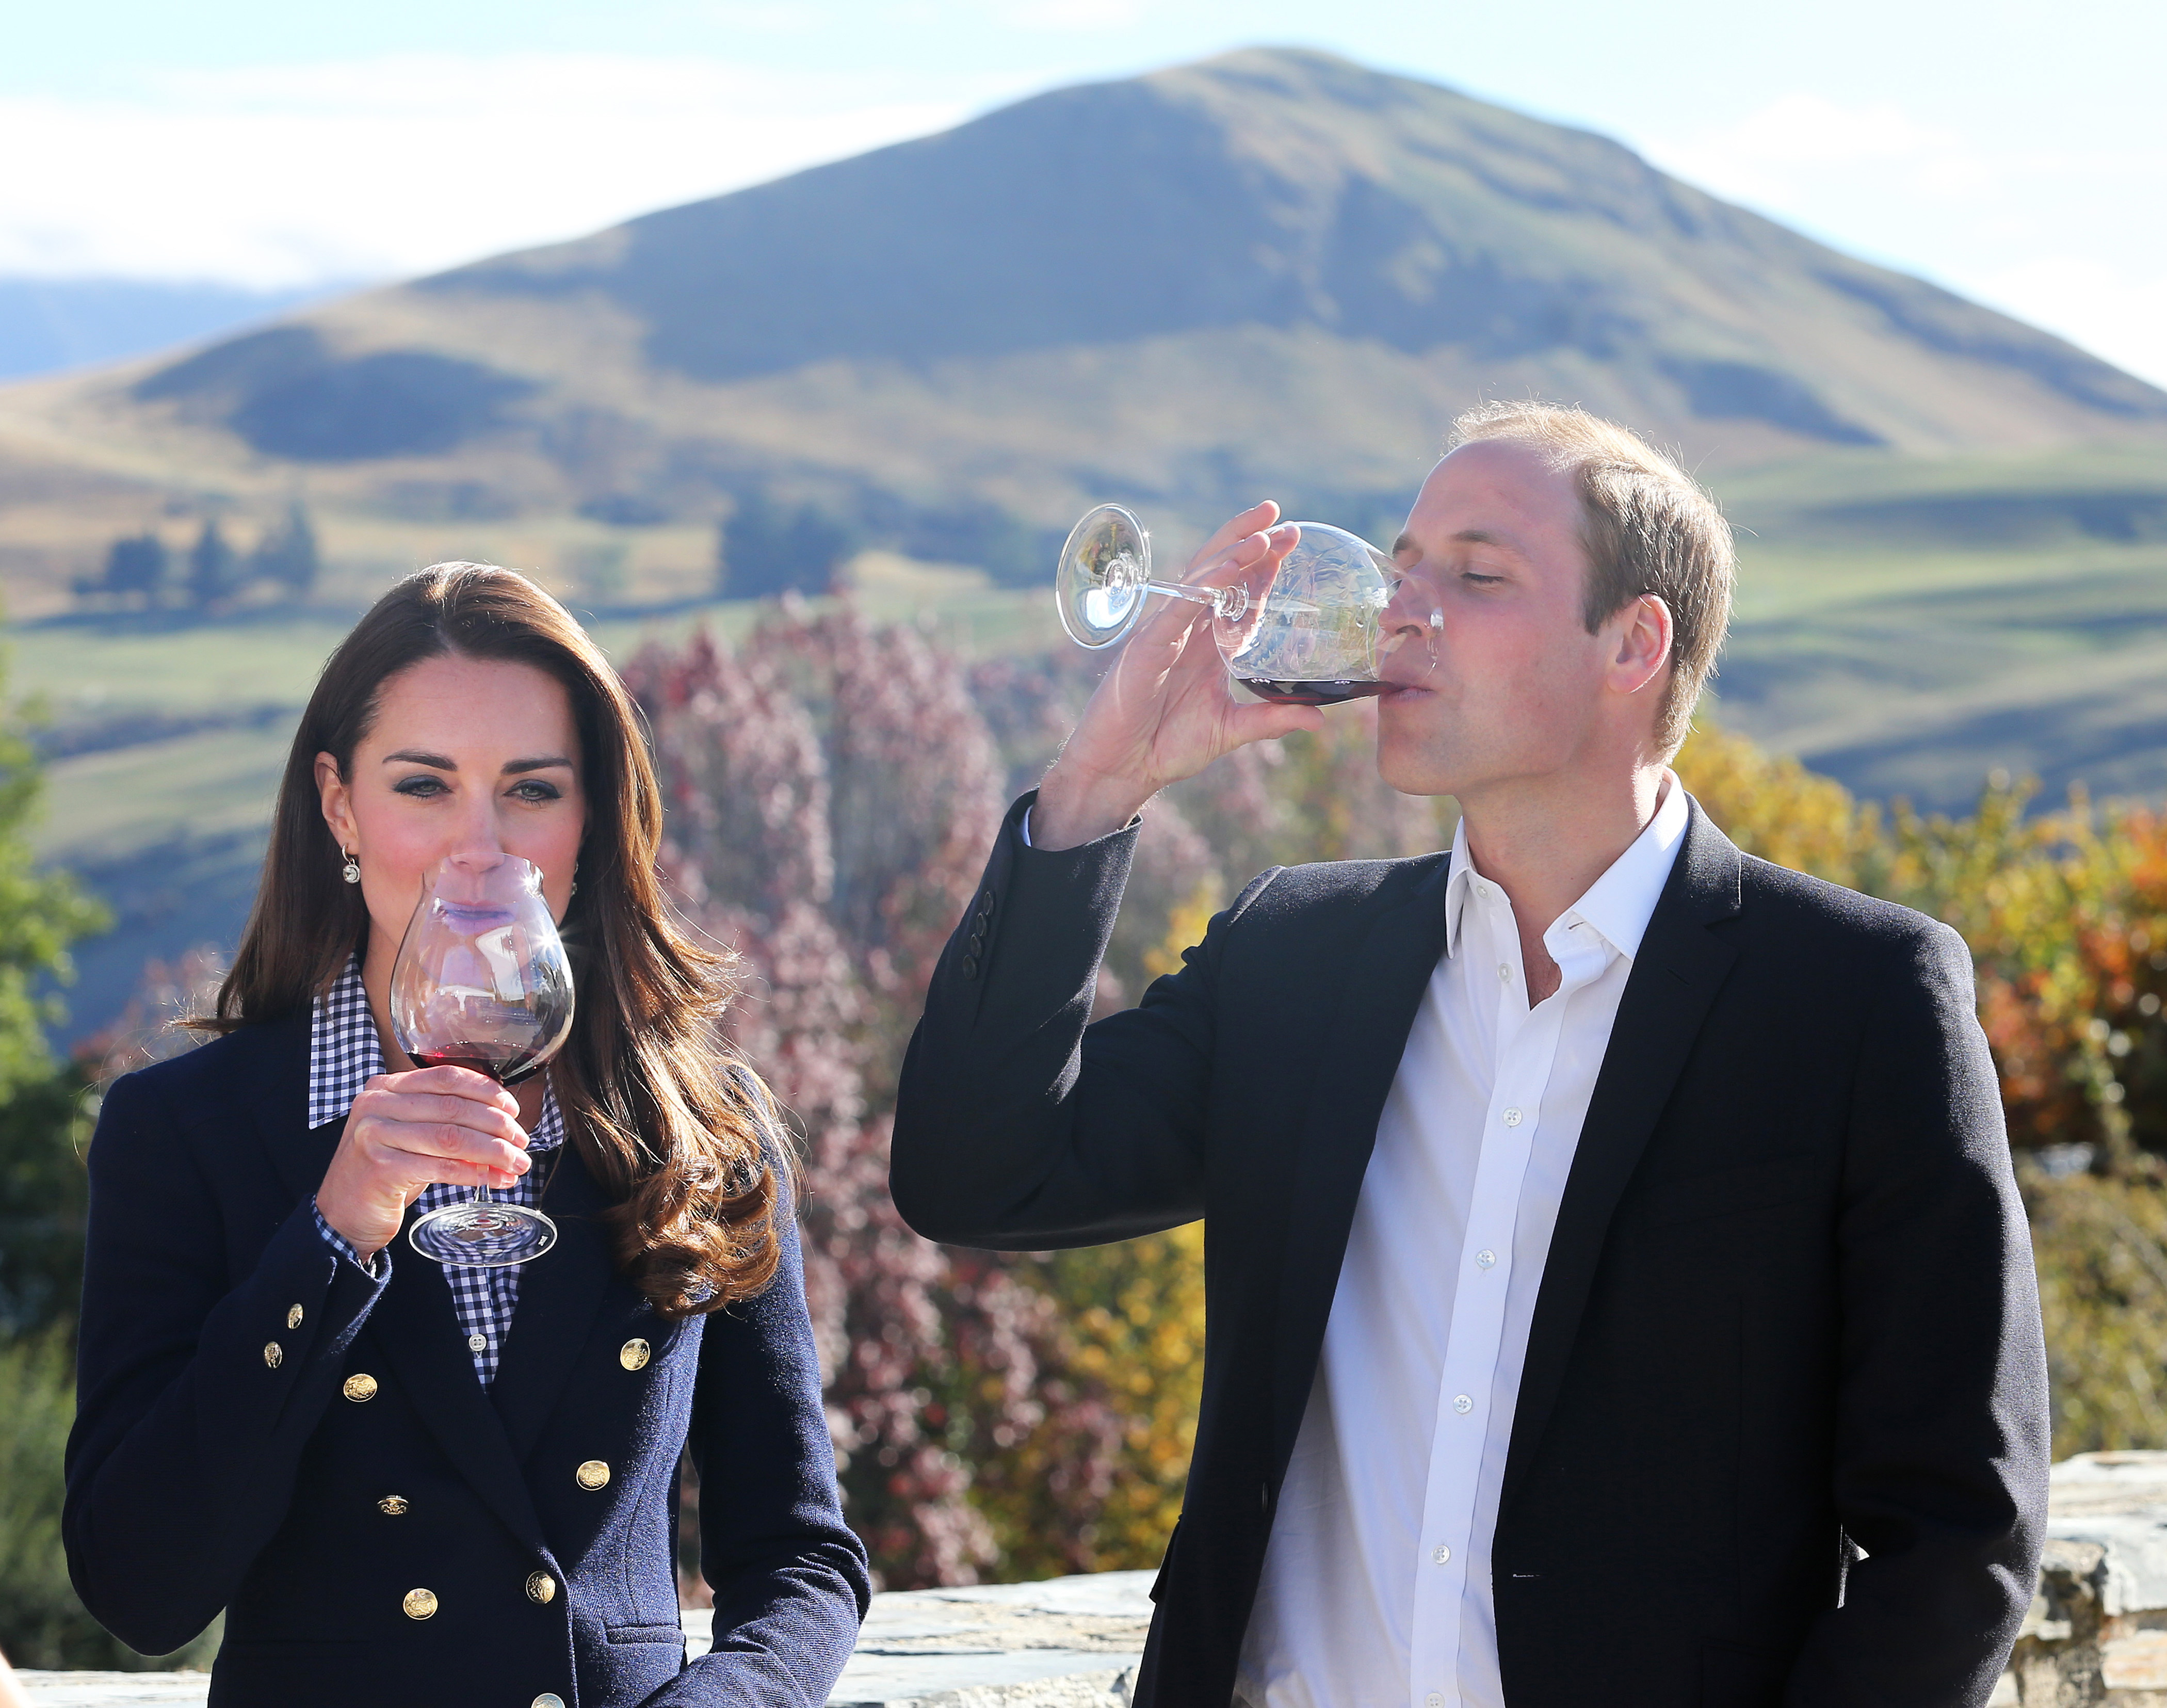 Kate Middleton and Prince William sample wine in 2014